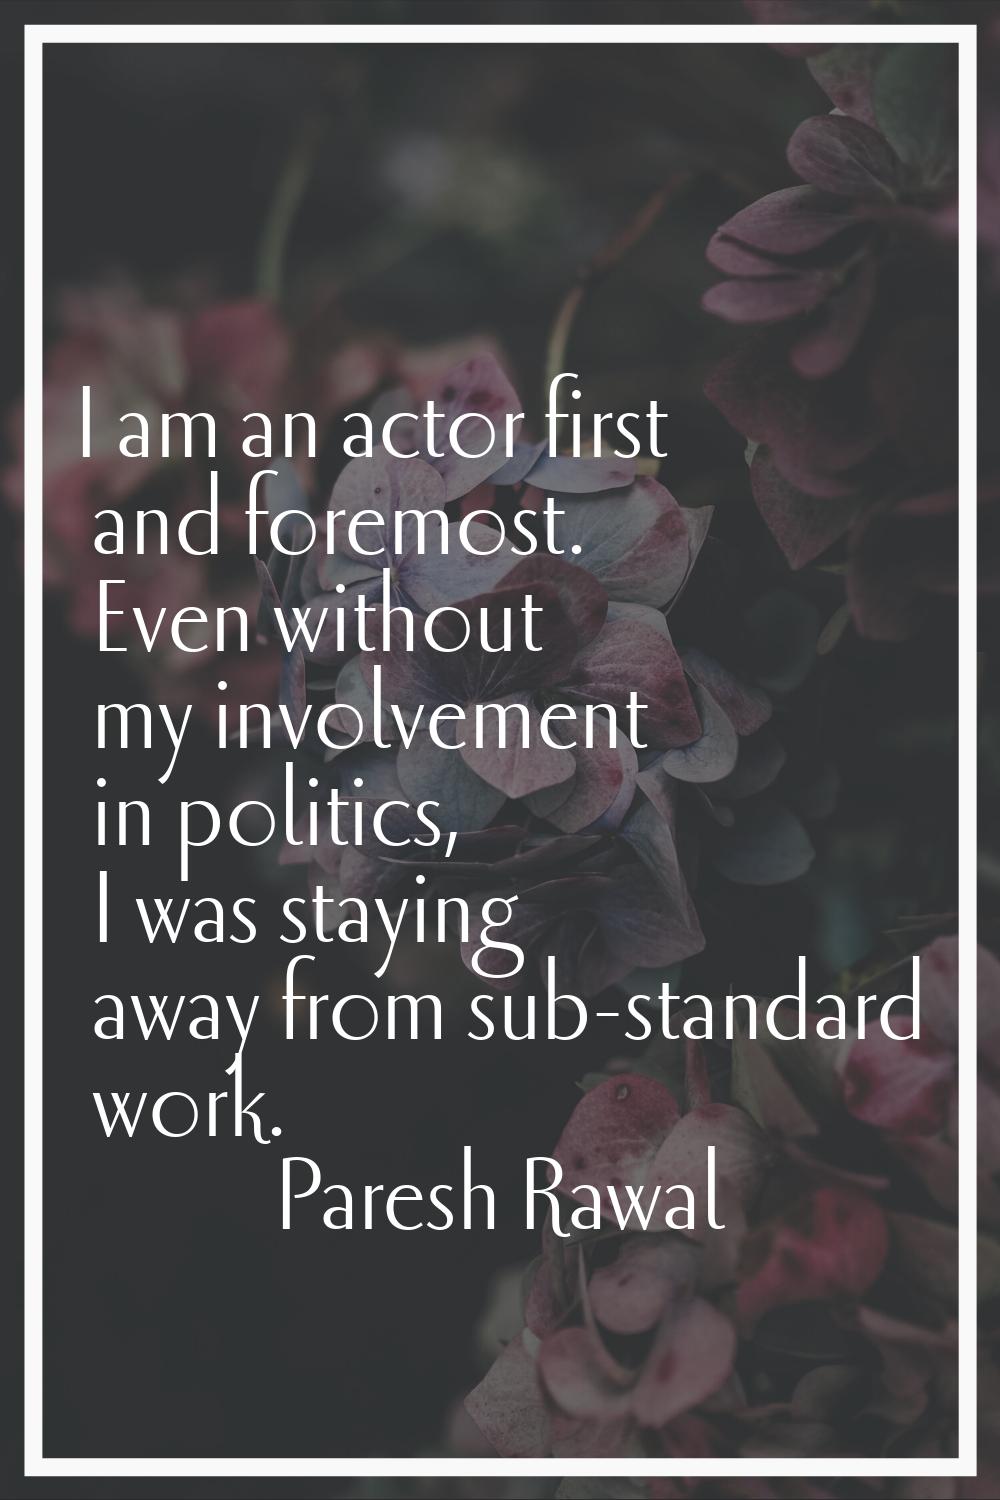 I am an actor first and foremost. Even without my involvement in politics, I was staying away from 